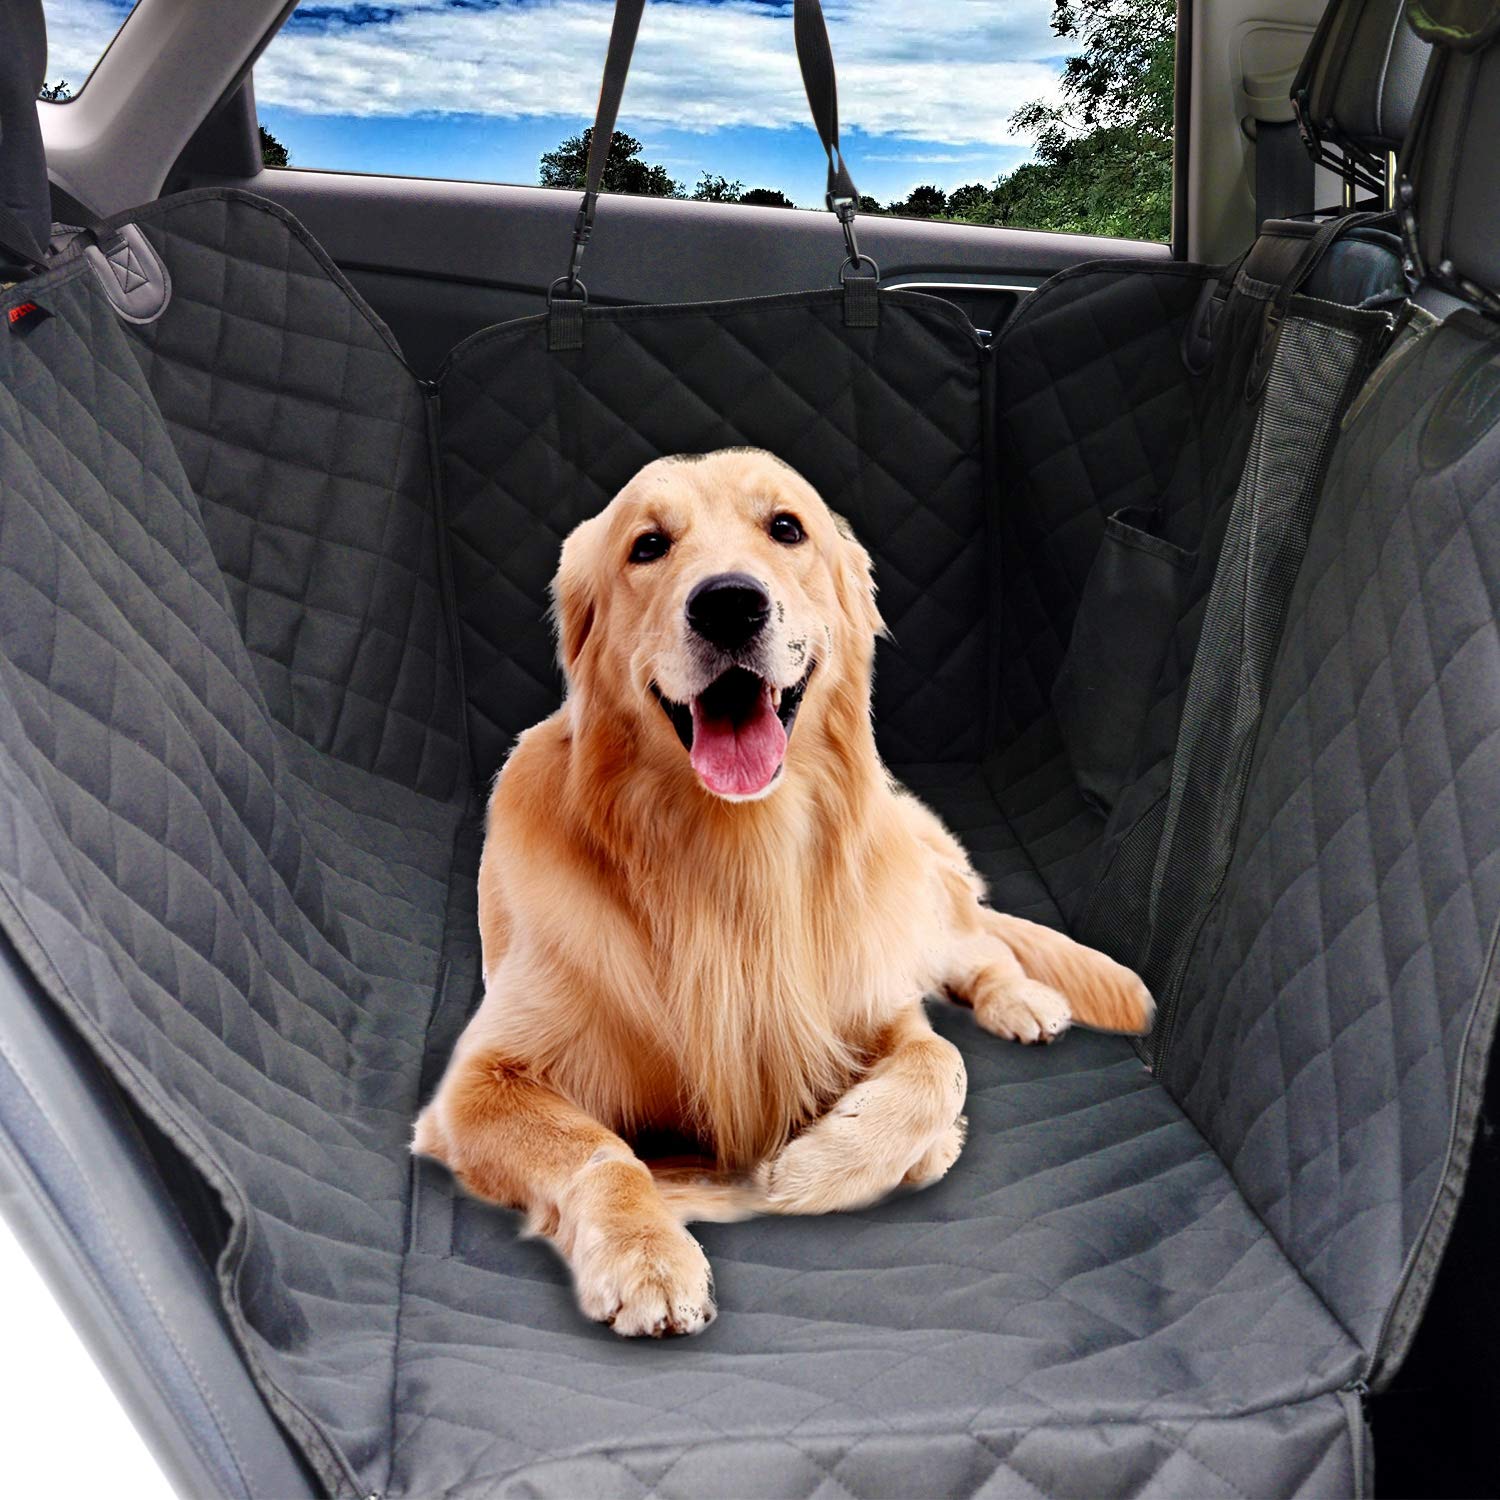 IPETS LAND Dog Car Seat Covers, Water Proof Car Seat Cover for Dogs